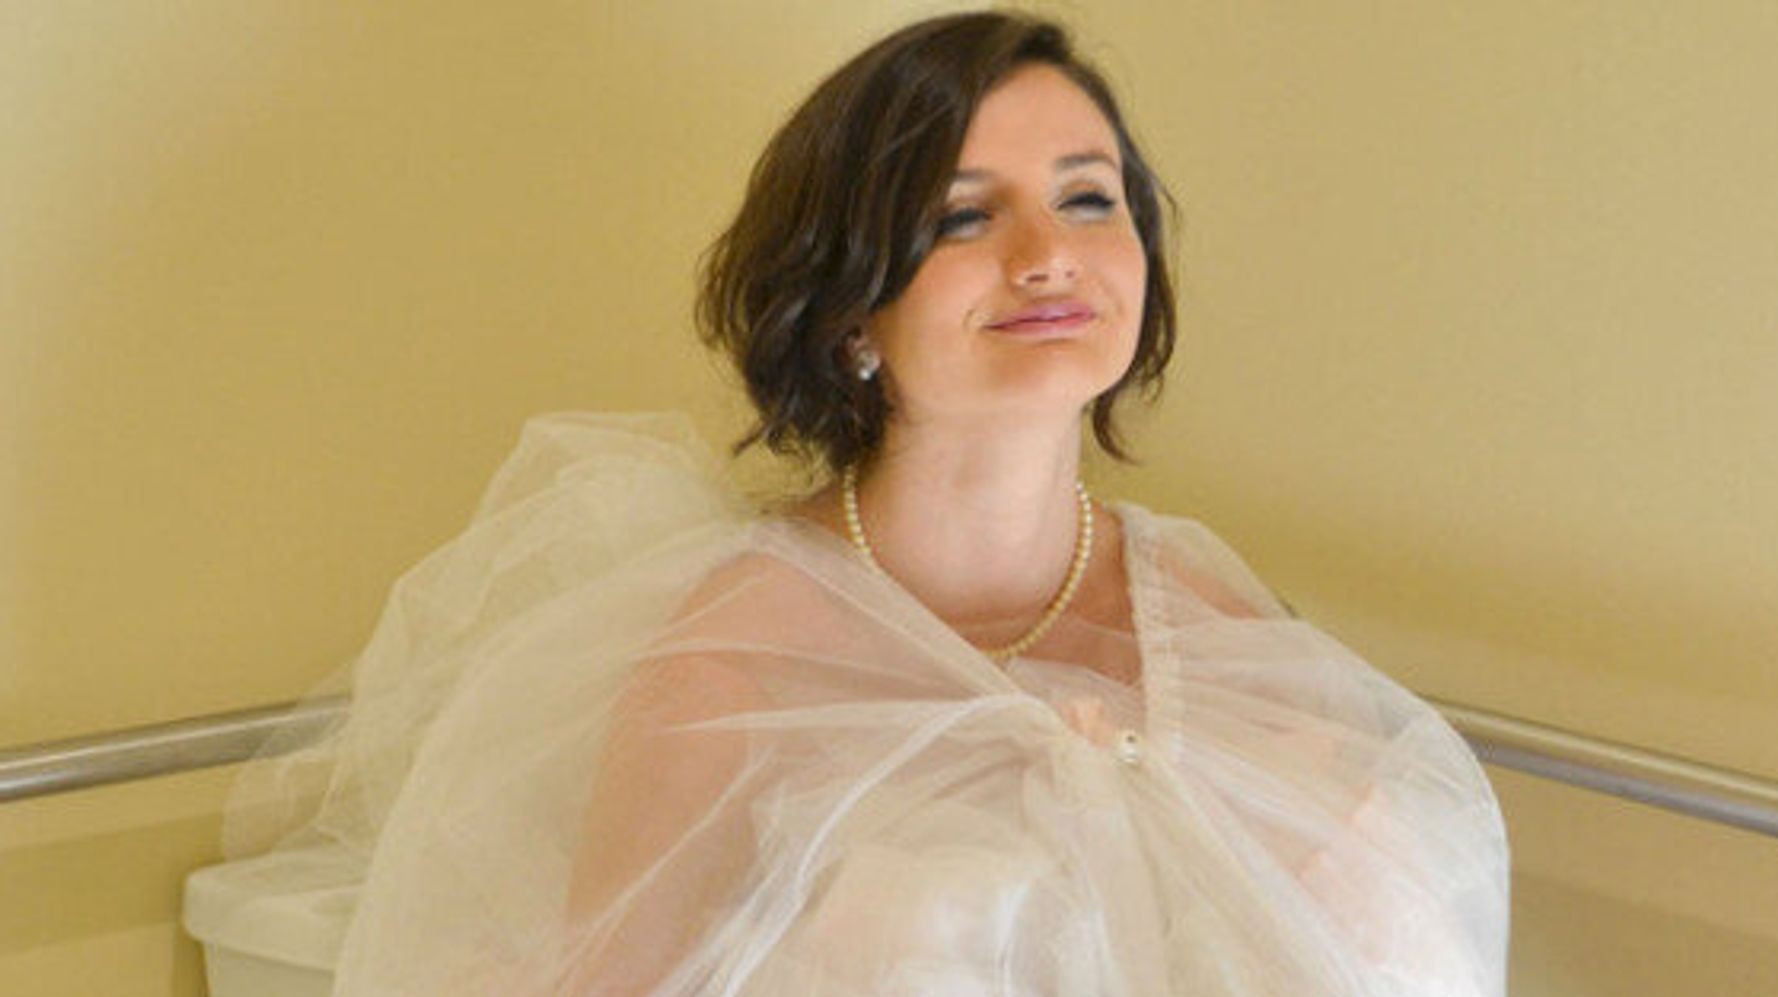 Bridal Buddy makes it easier for brides to use the bathroom in their wedding  dress